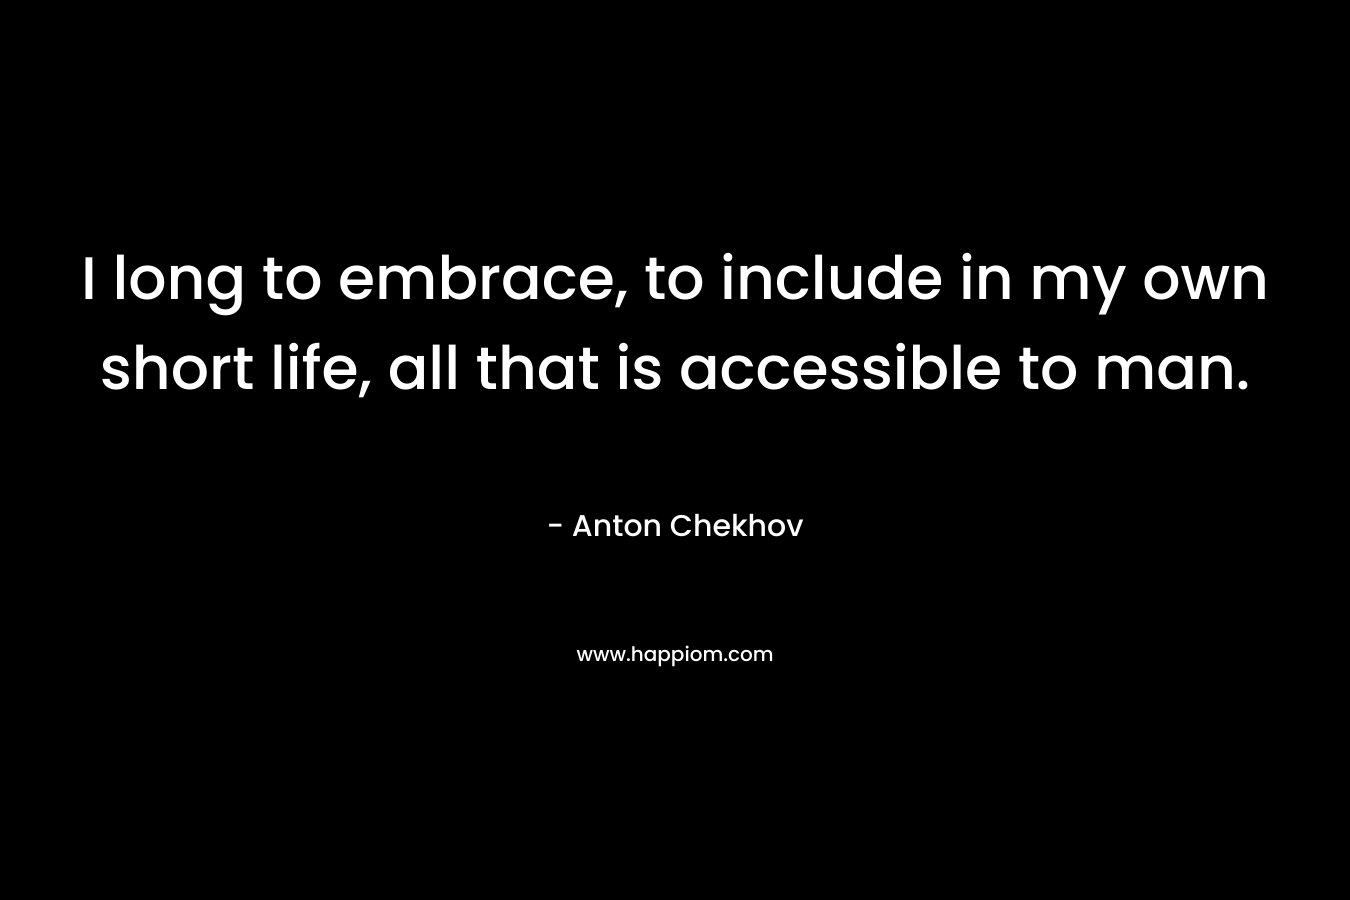 I long to embrace, to include in my own short life, all that is accessible to man. – Anton Chekhov